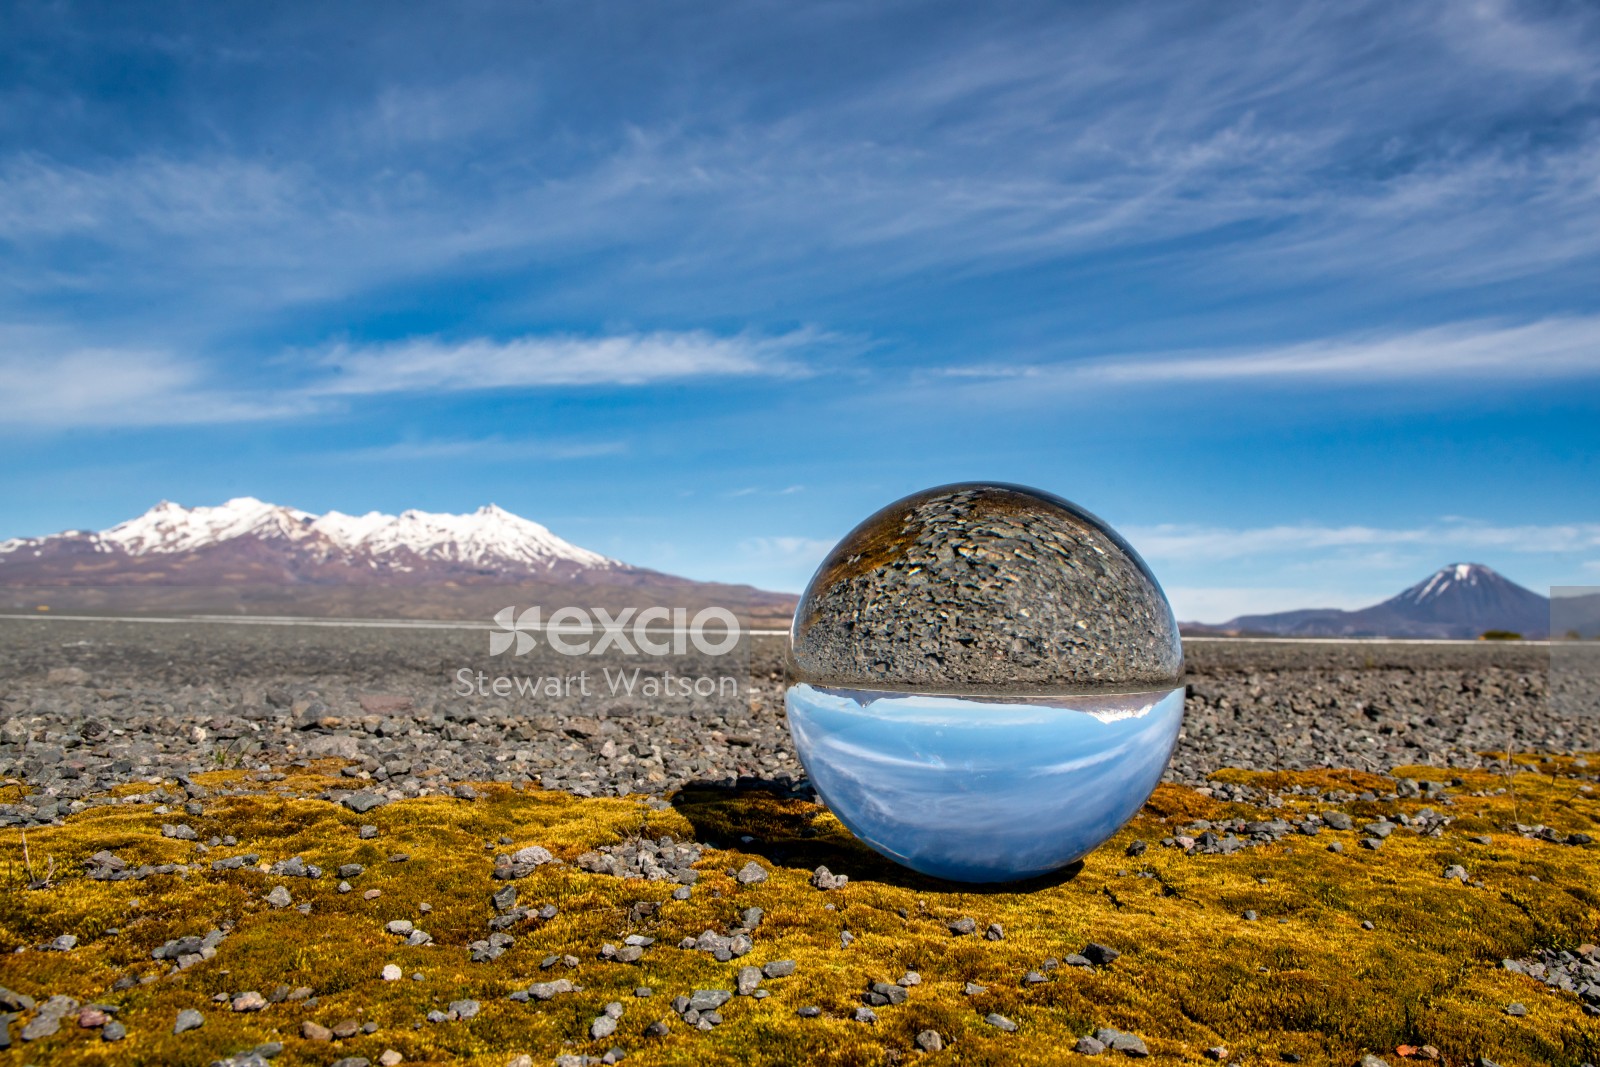 Crystal ball capture in the desert road